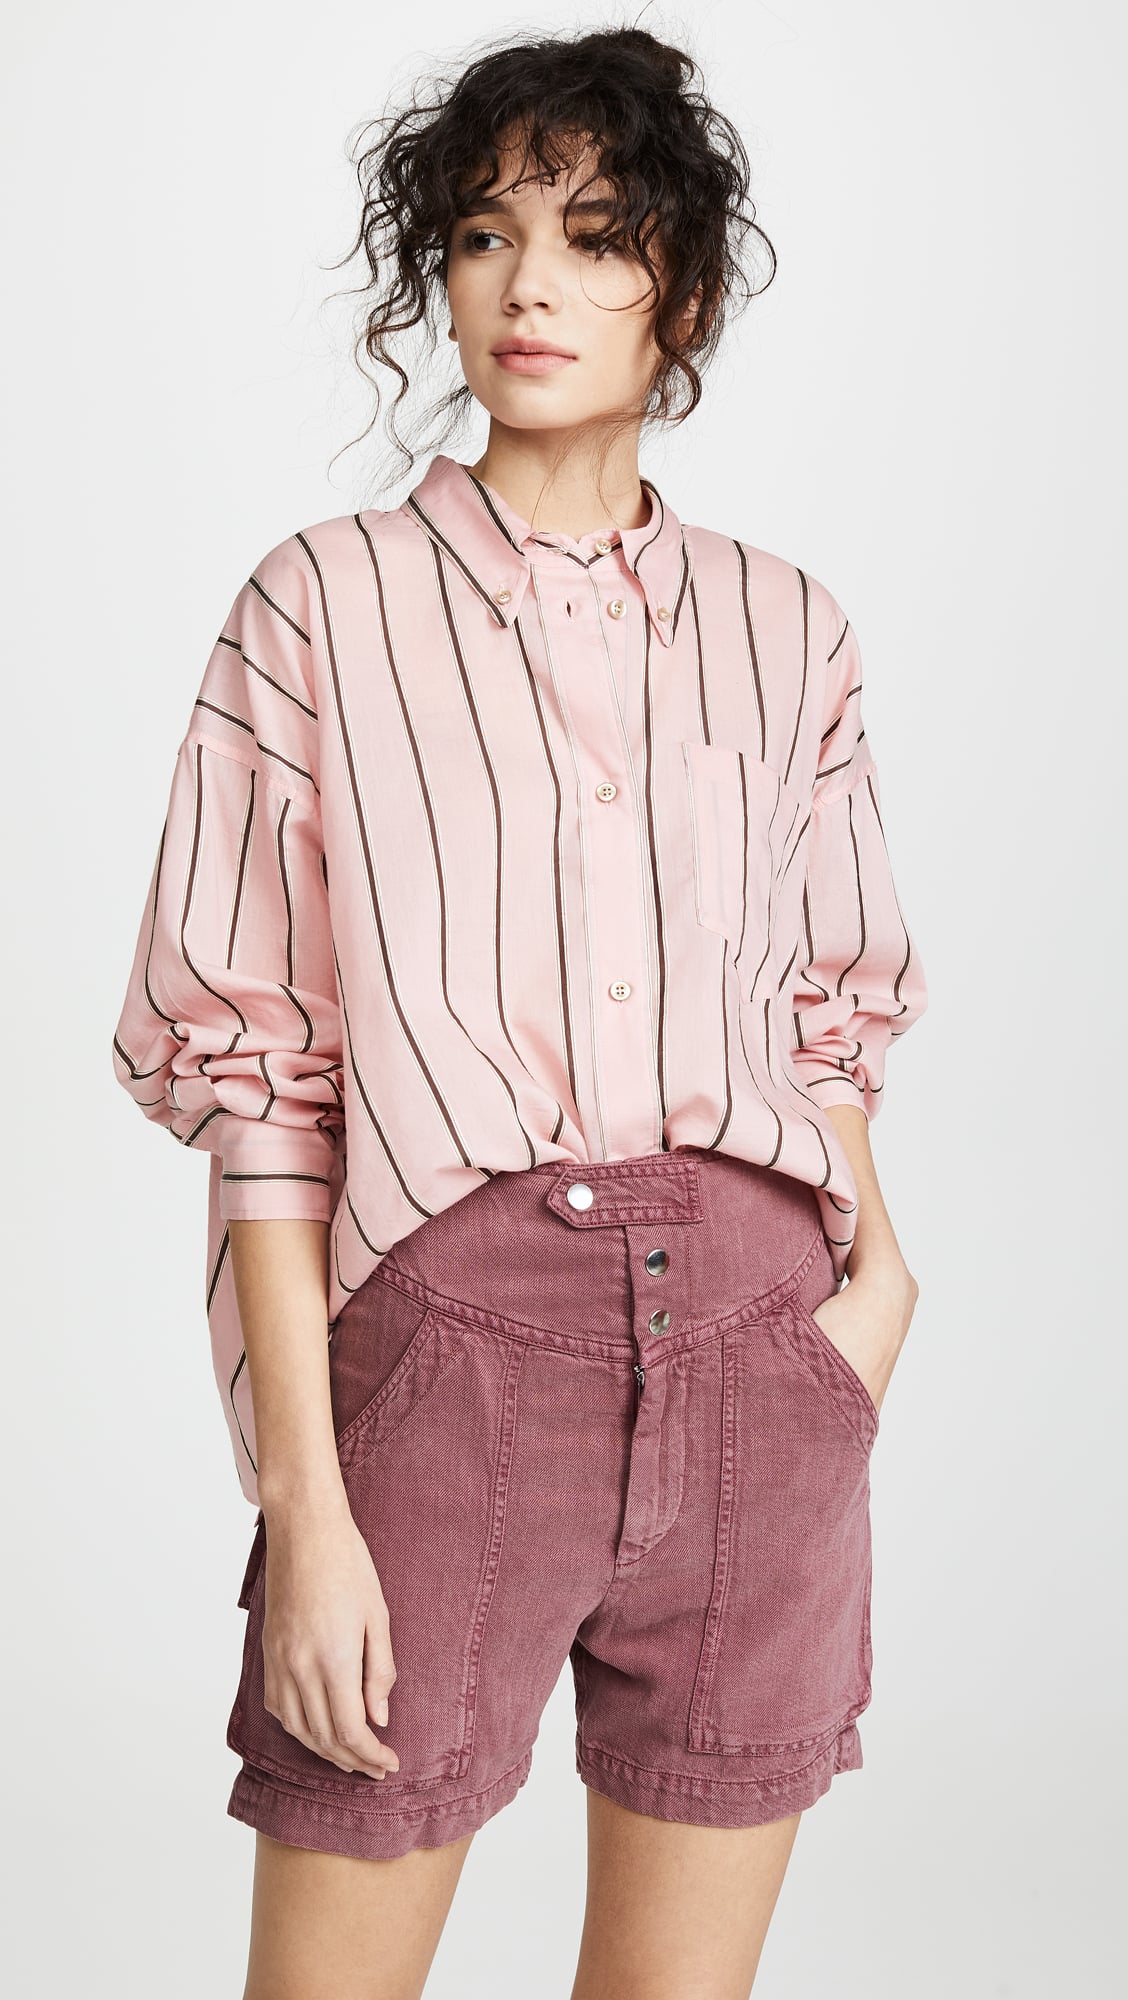 Isabel Marant Etoile Button Down Shirt | The 8 Biggest Street Style Trends Now, According to an Industry Insider | POPSUGAR Fashion 13